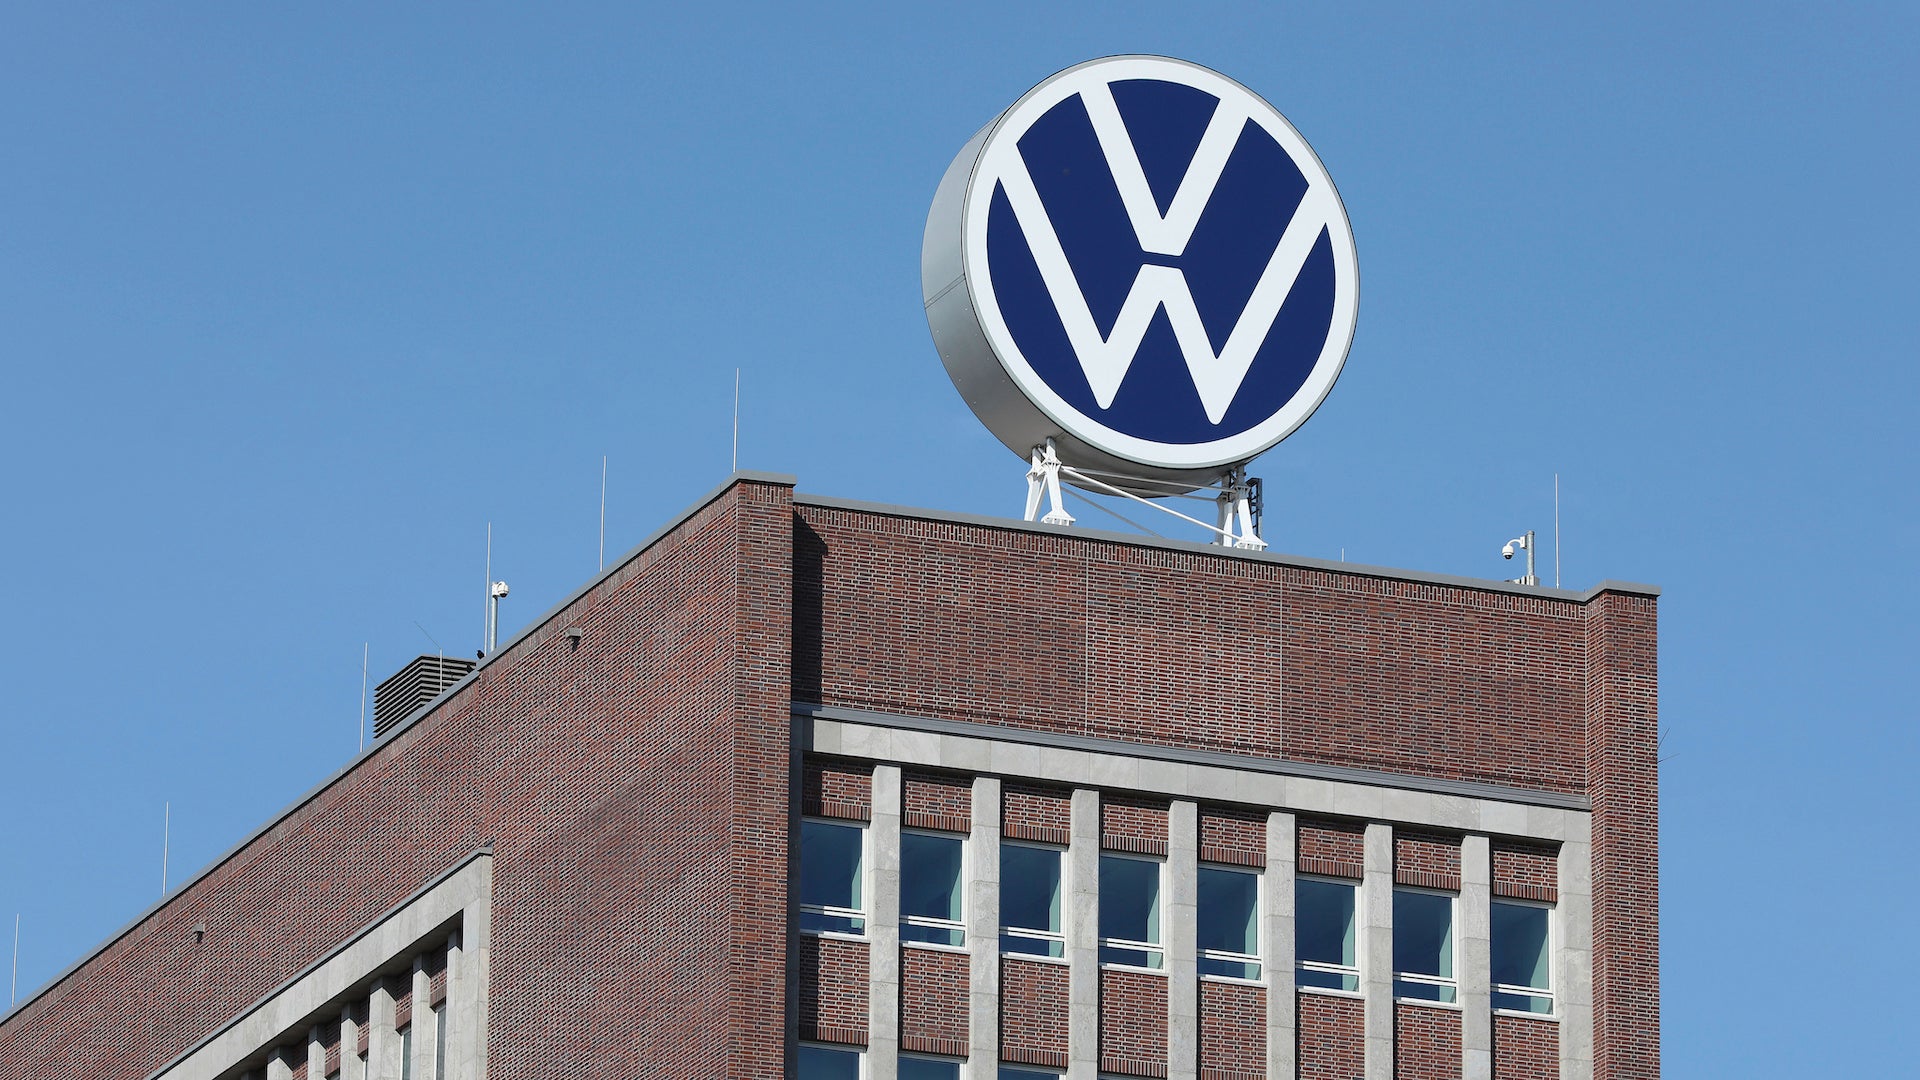 VW’s Main Factory Producing Fewest Cars Since 1958: Report